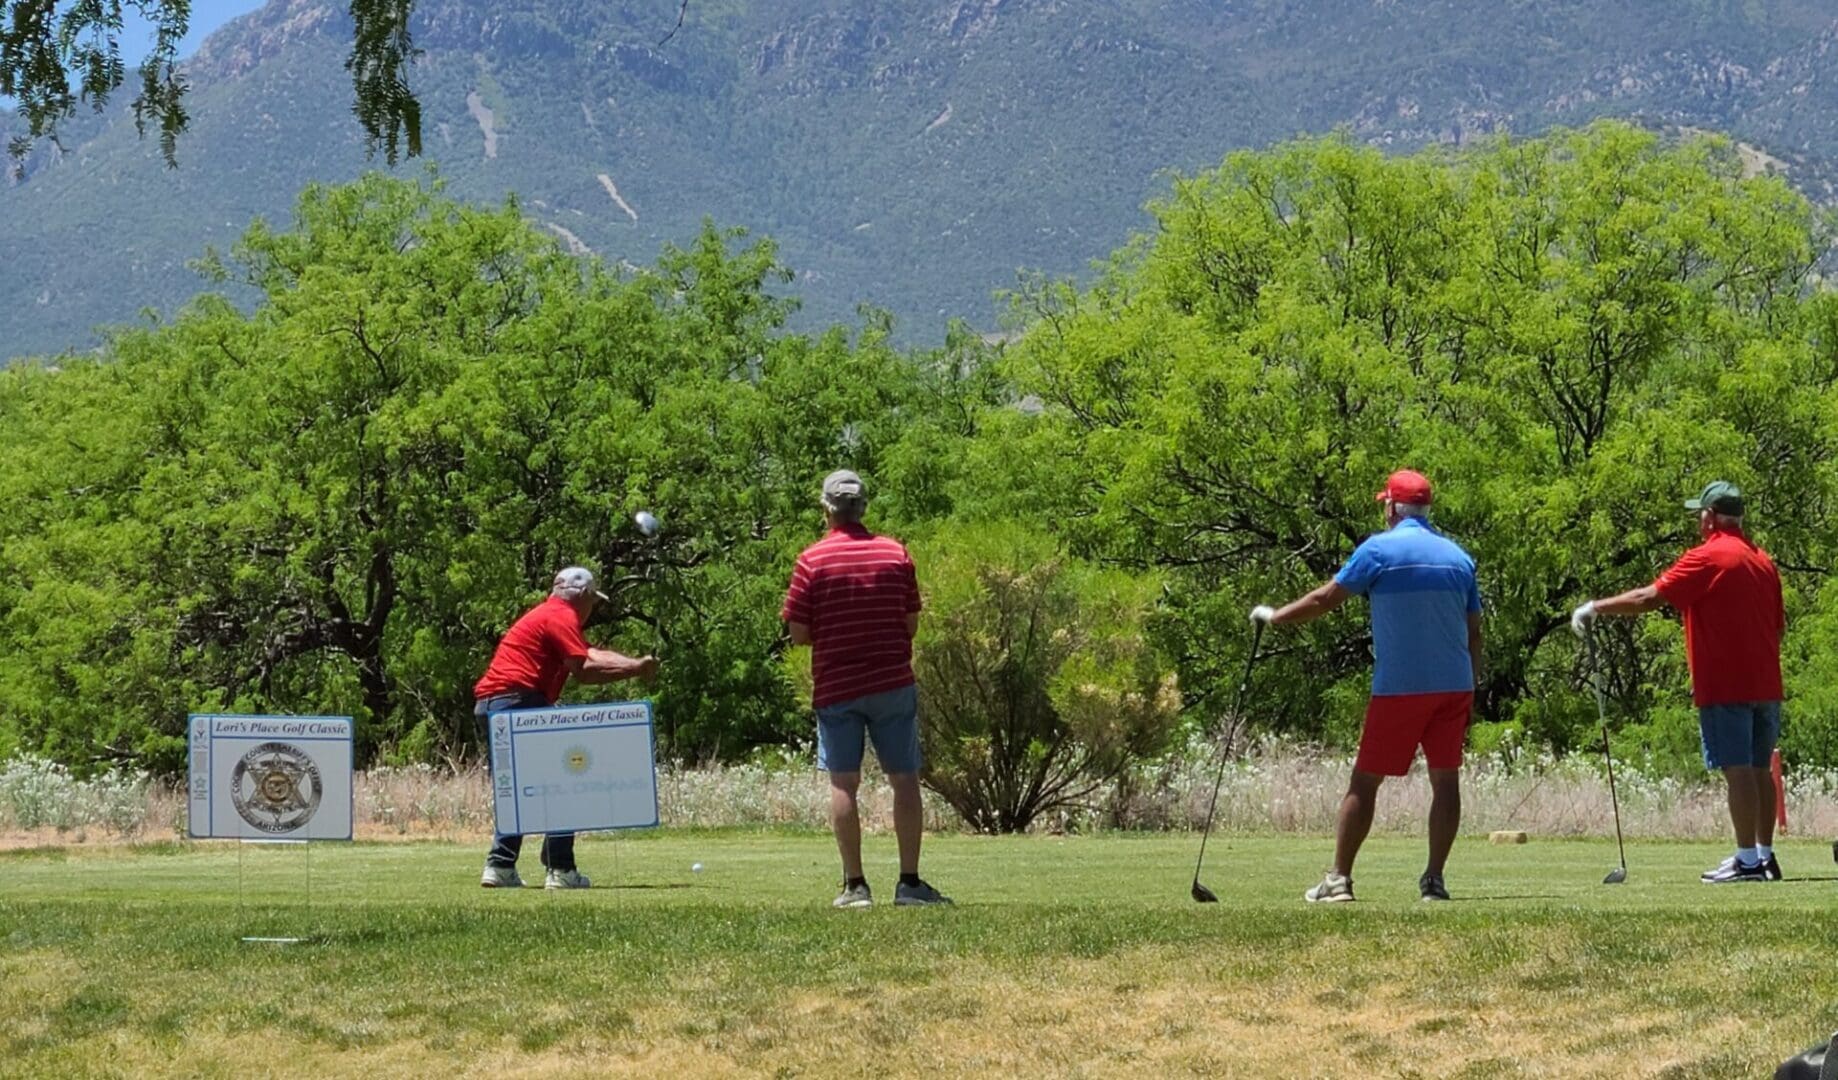 Three men are playing golf on a green.